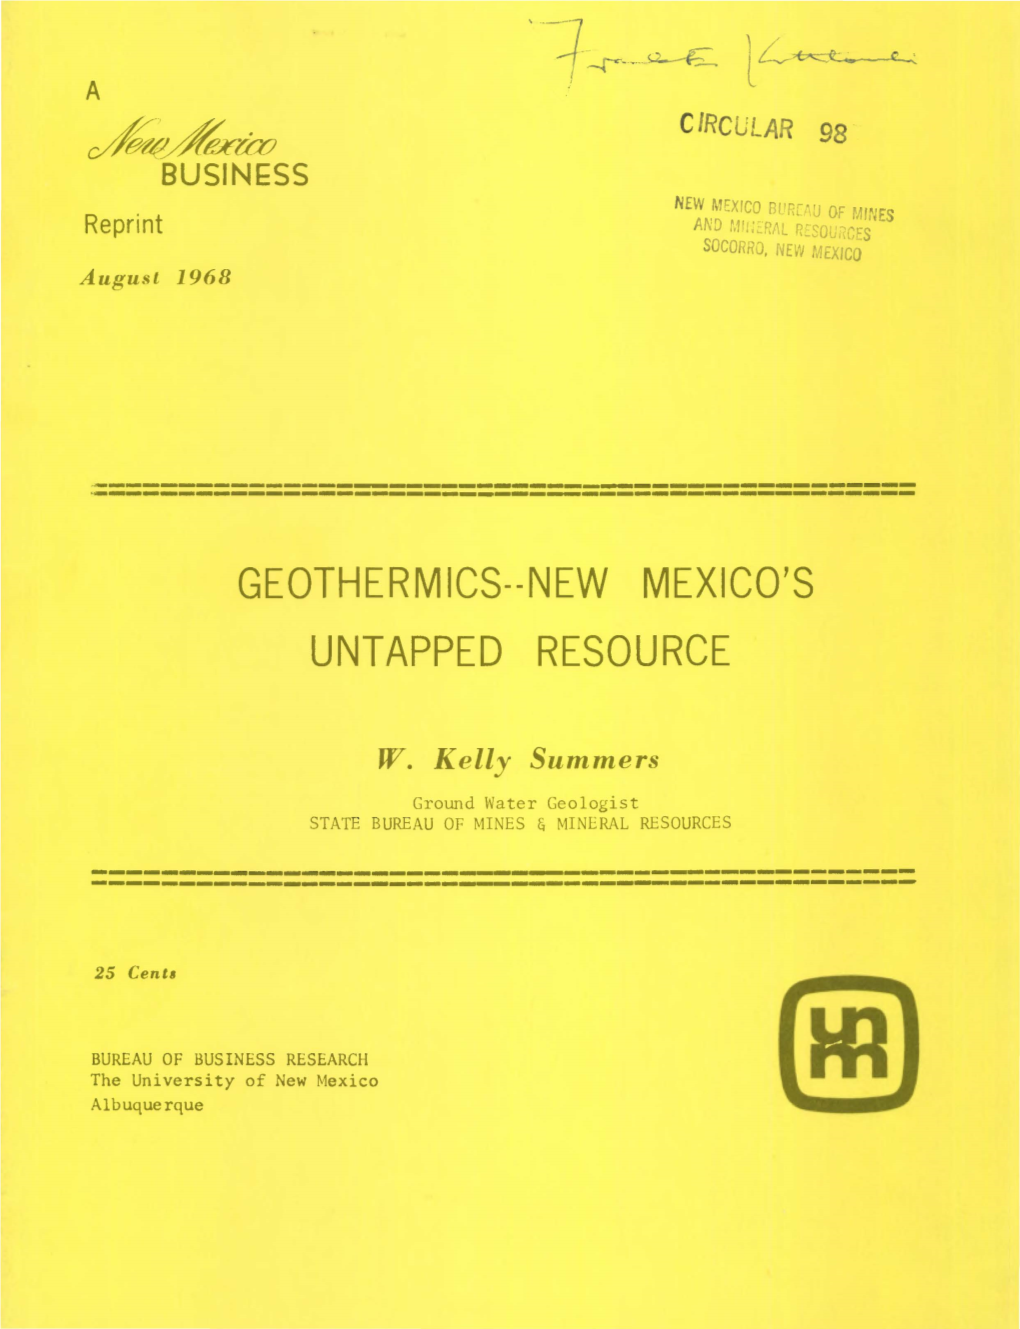 New Mexico's Untapped Resources